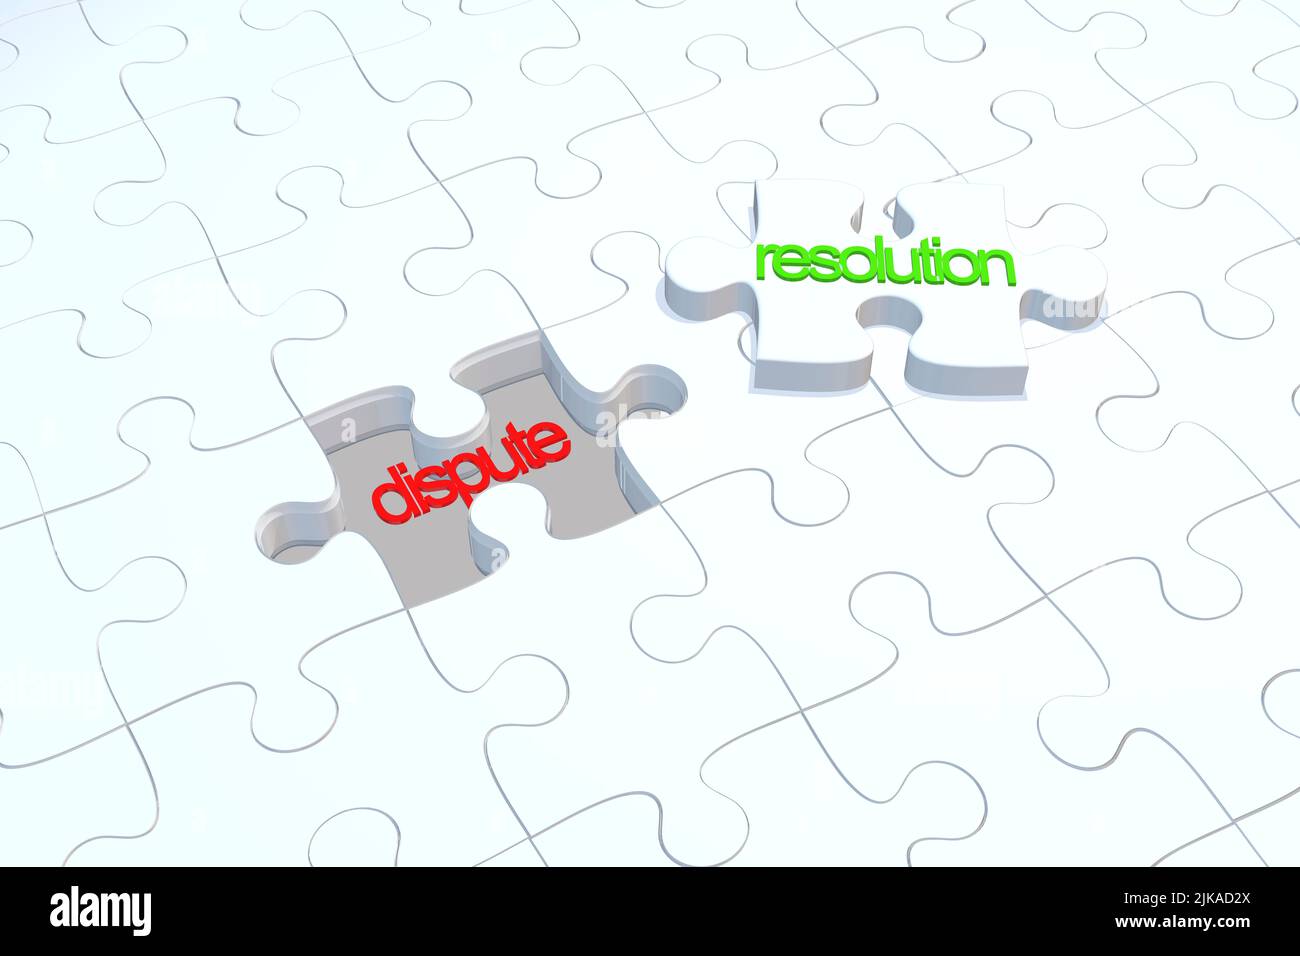 3D jigsaw concept with problem answer solution concept dispute resolution concept white puzzle Stock Photo